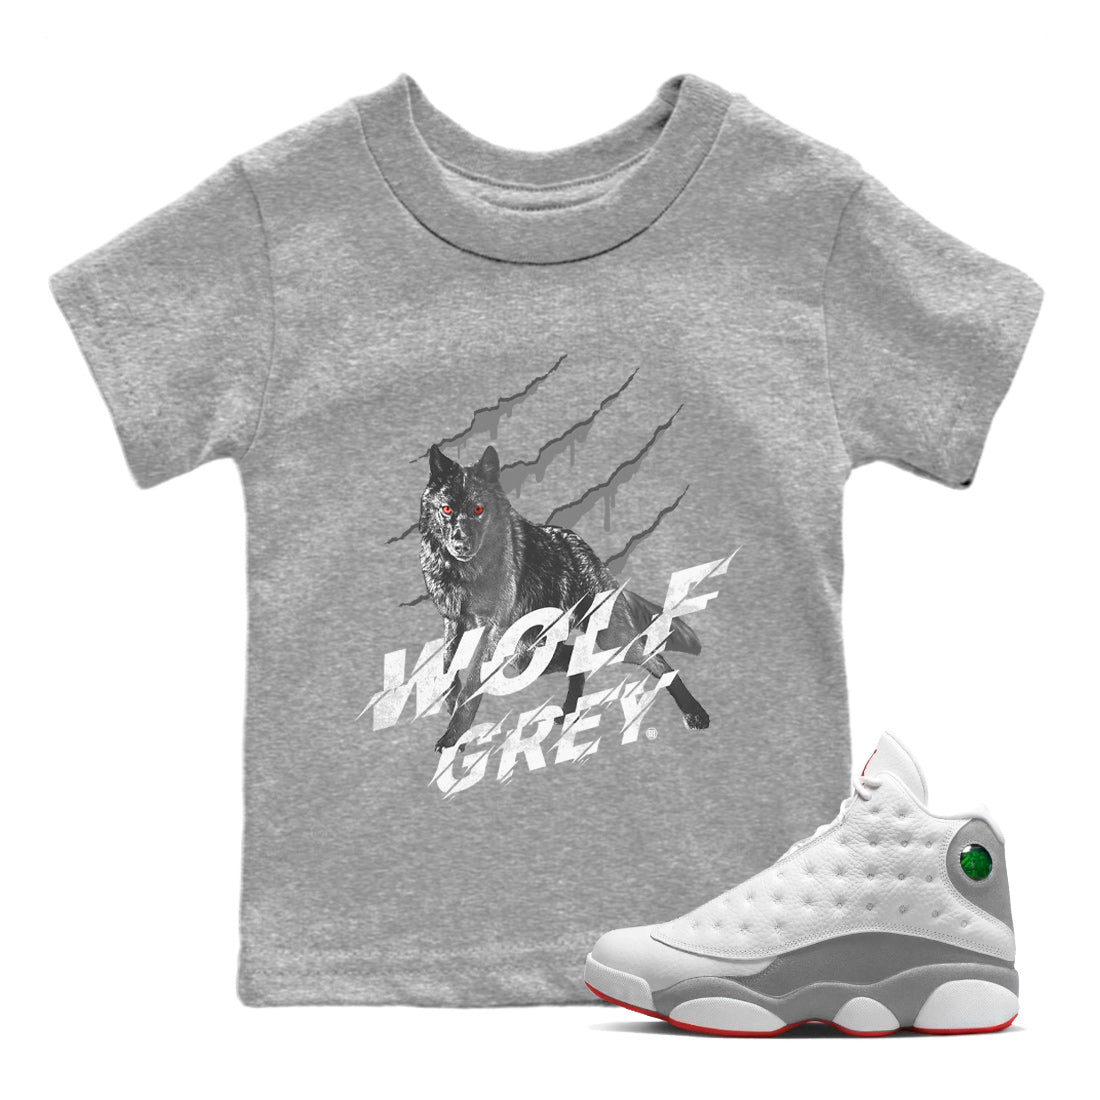 Air Jordan 13 Wolf Grey Wolf Scratch Baby and Kids Sneaker Tees Air Jordan 13 Wolf Grey Kids Sneaker Tees Size Chart